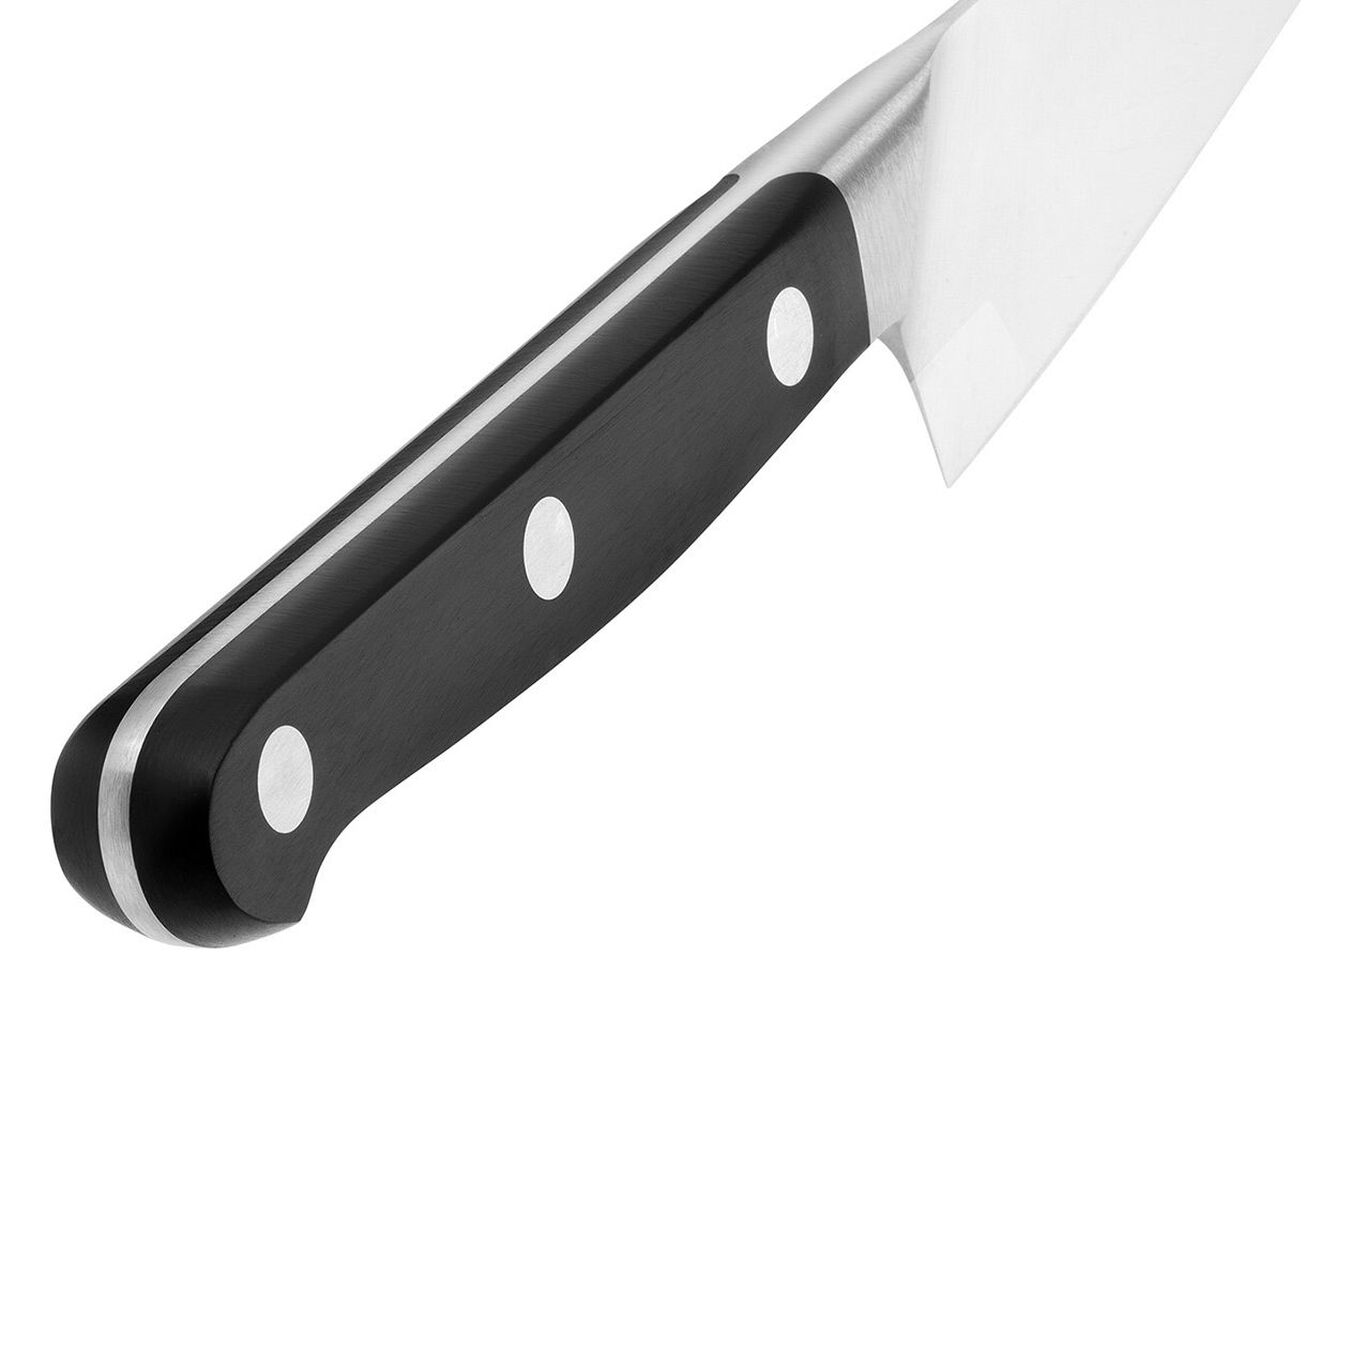 5.5-inch Chef's knife compact, Fine Edge  - Visual Imperfections,,large 5